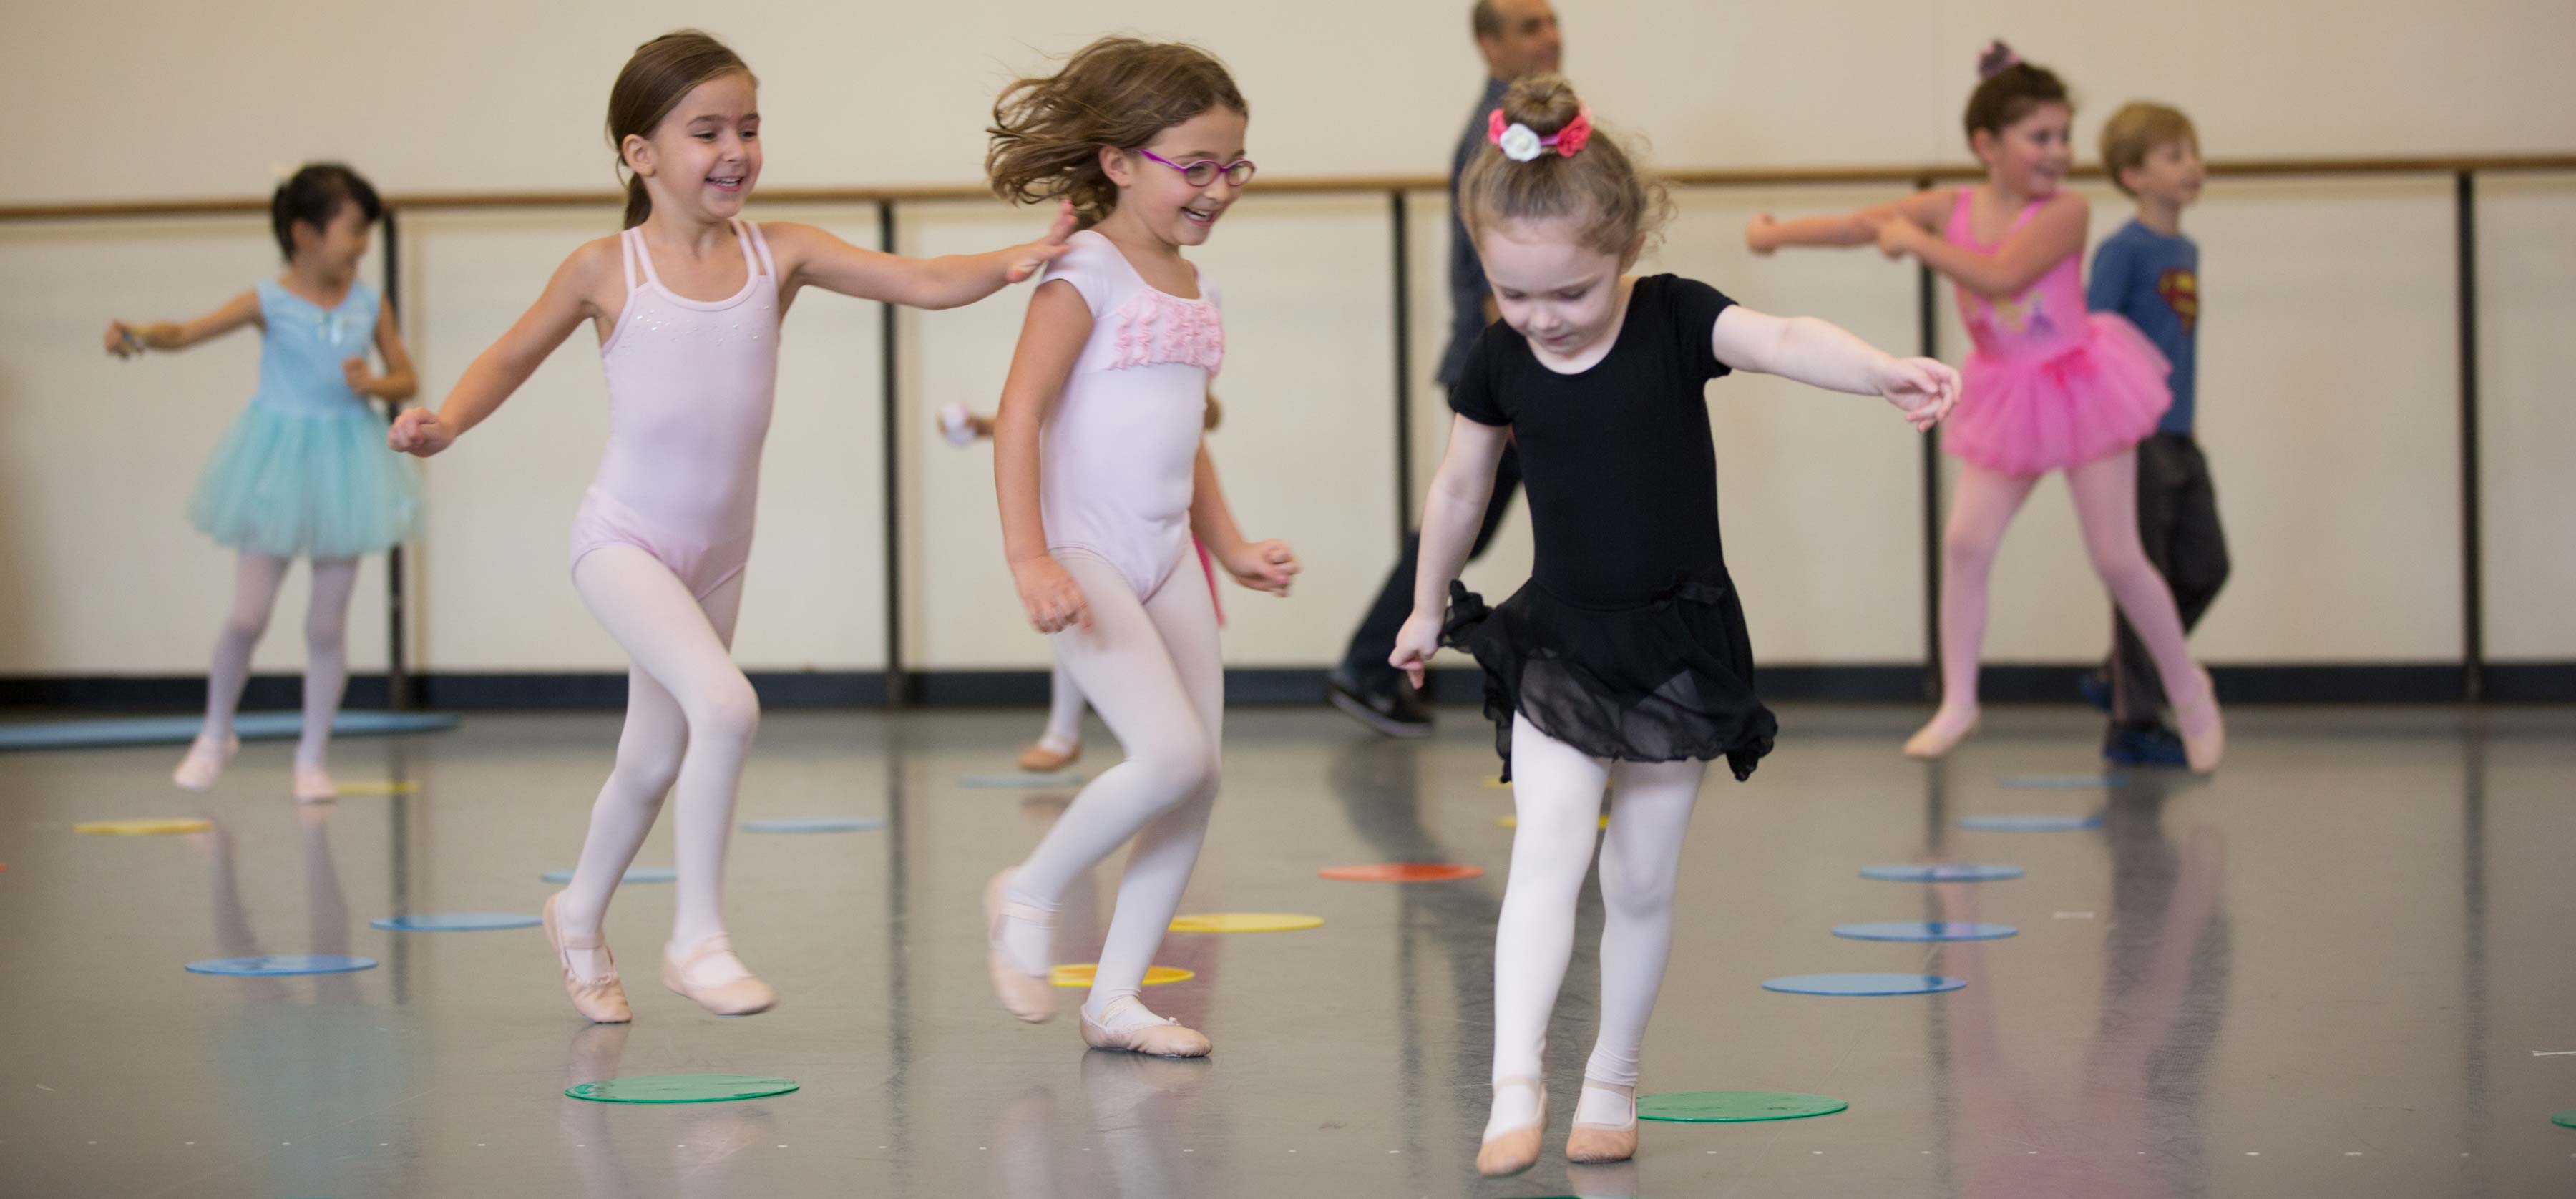 An image of several young ballet dancers in a row, practicing in a dance studio.